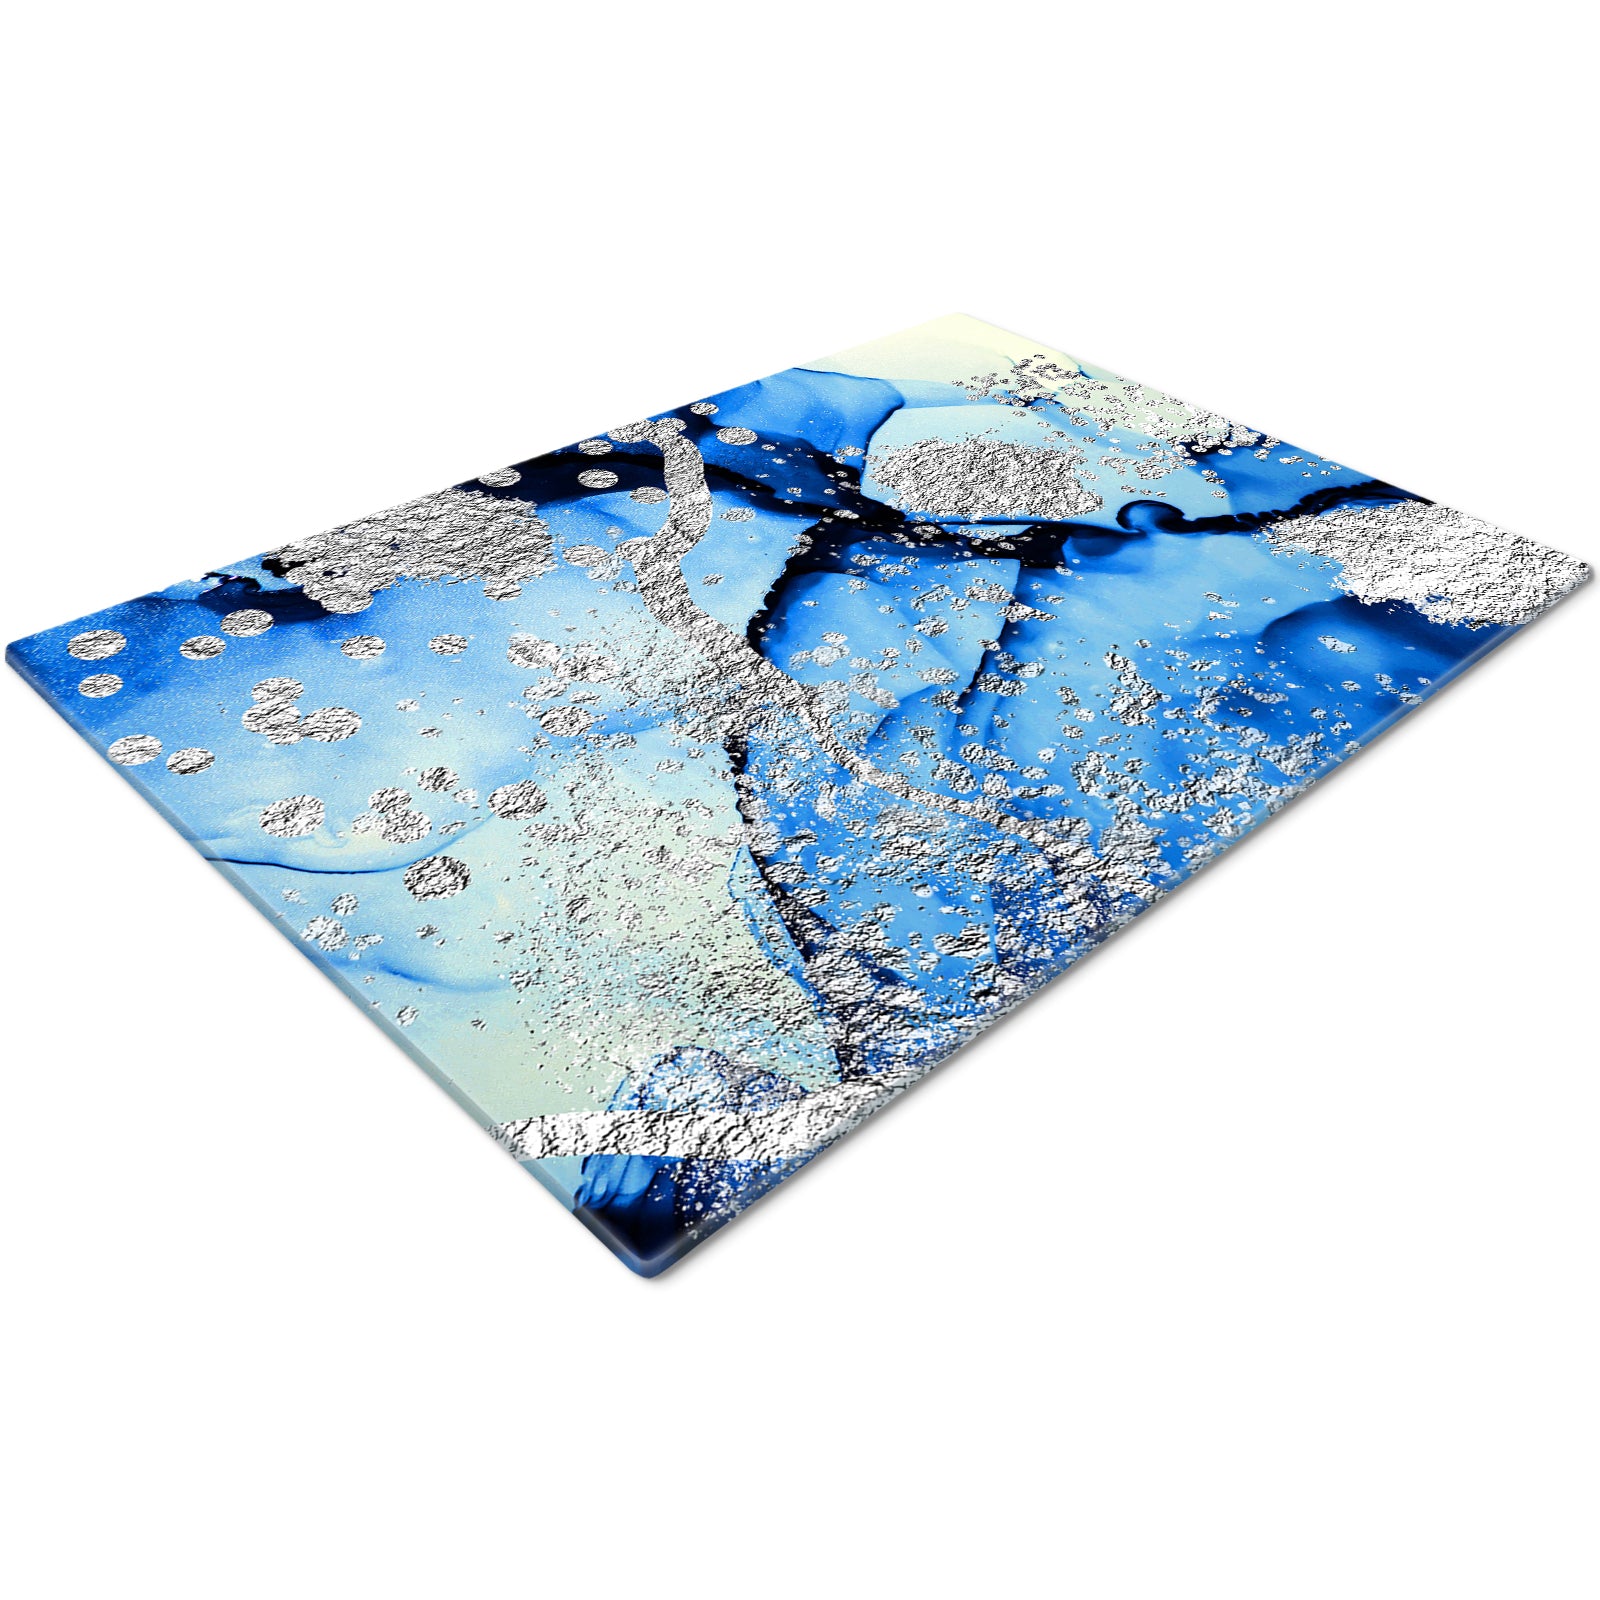 Glass Chopping Board for Kitchen in Blue Black Silver Design 3